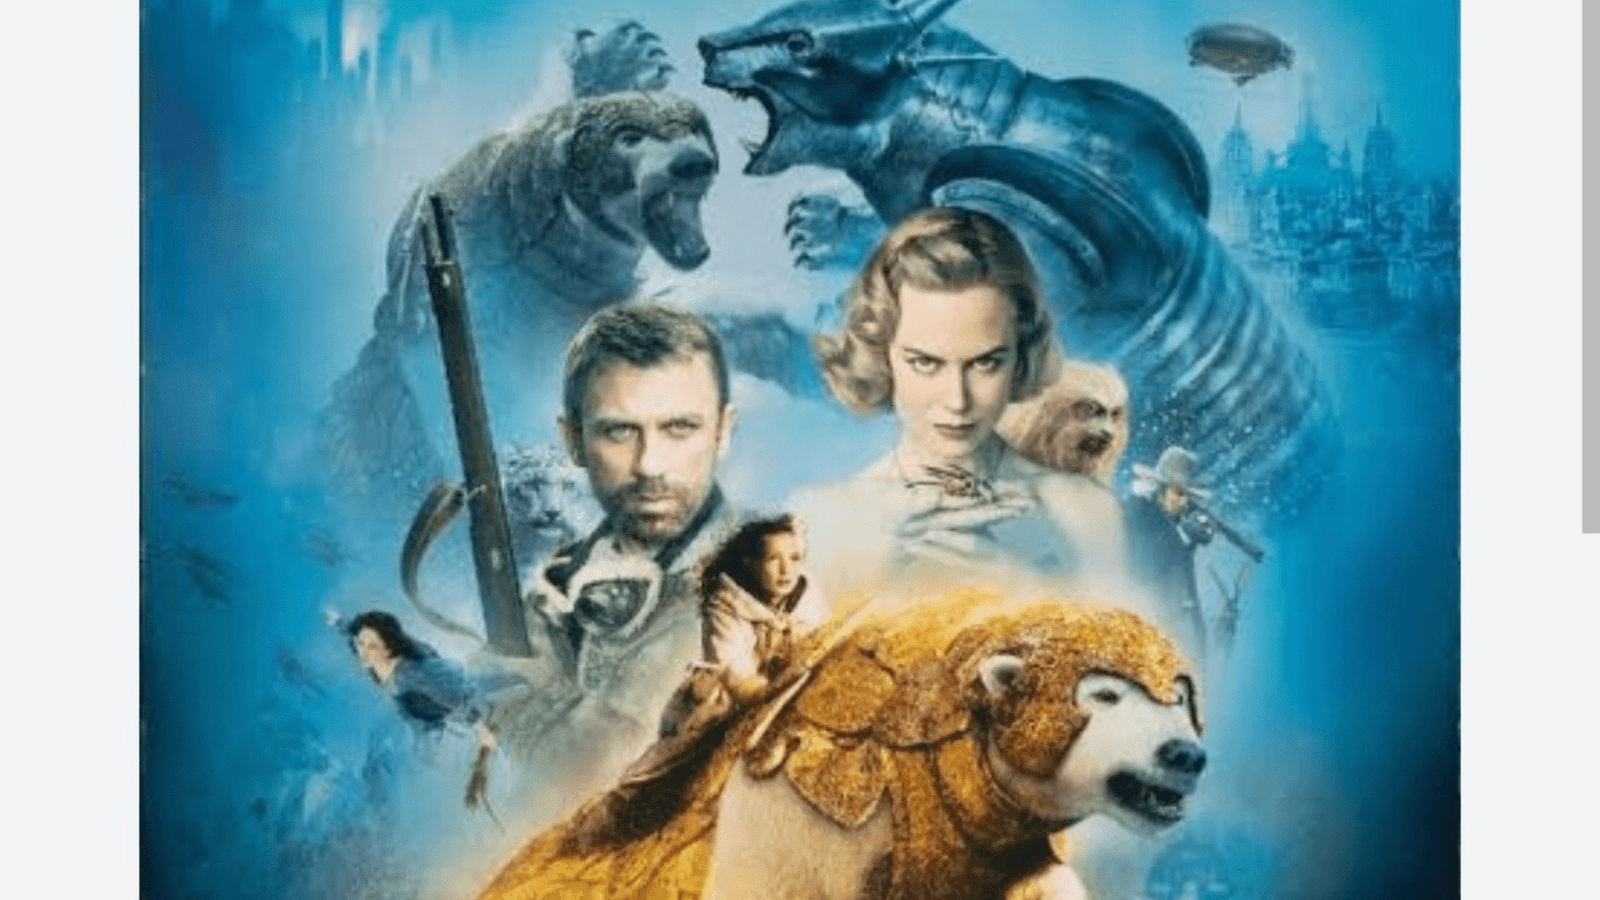 Is There a Golden Compass Sequel Movie?